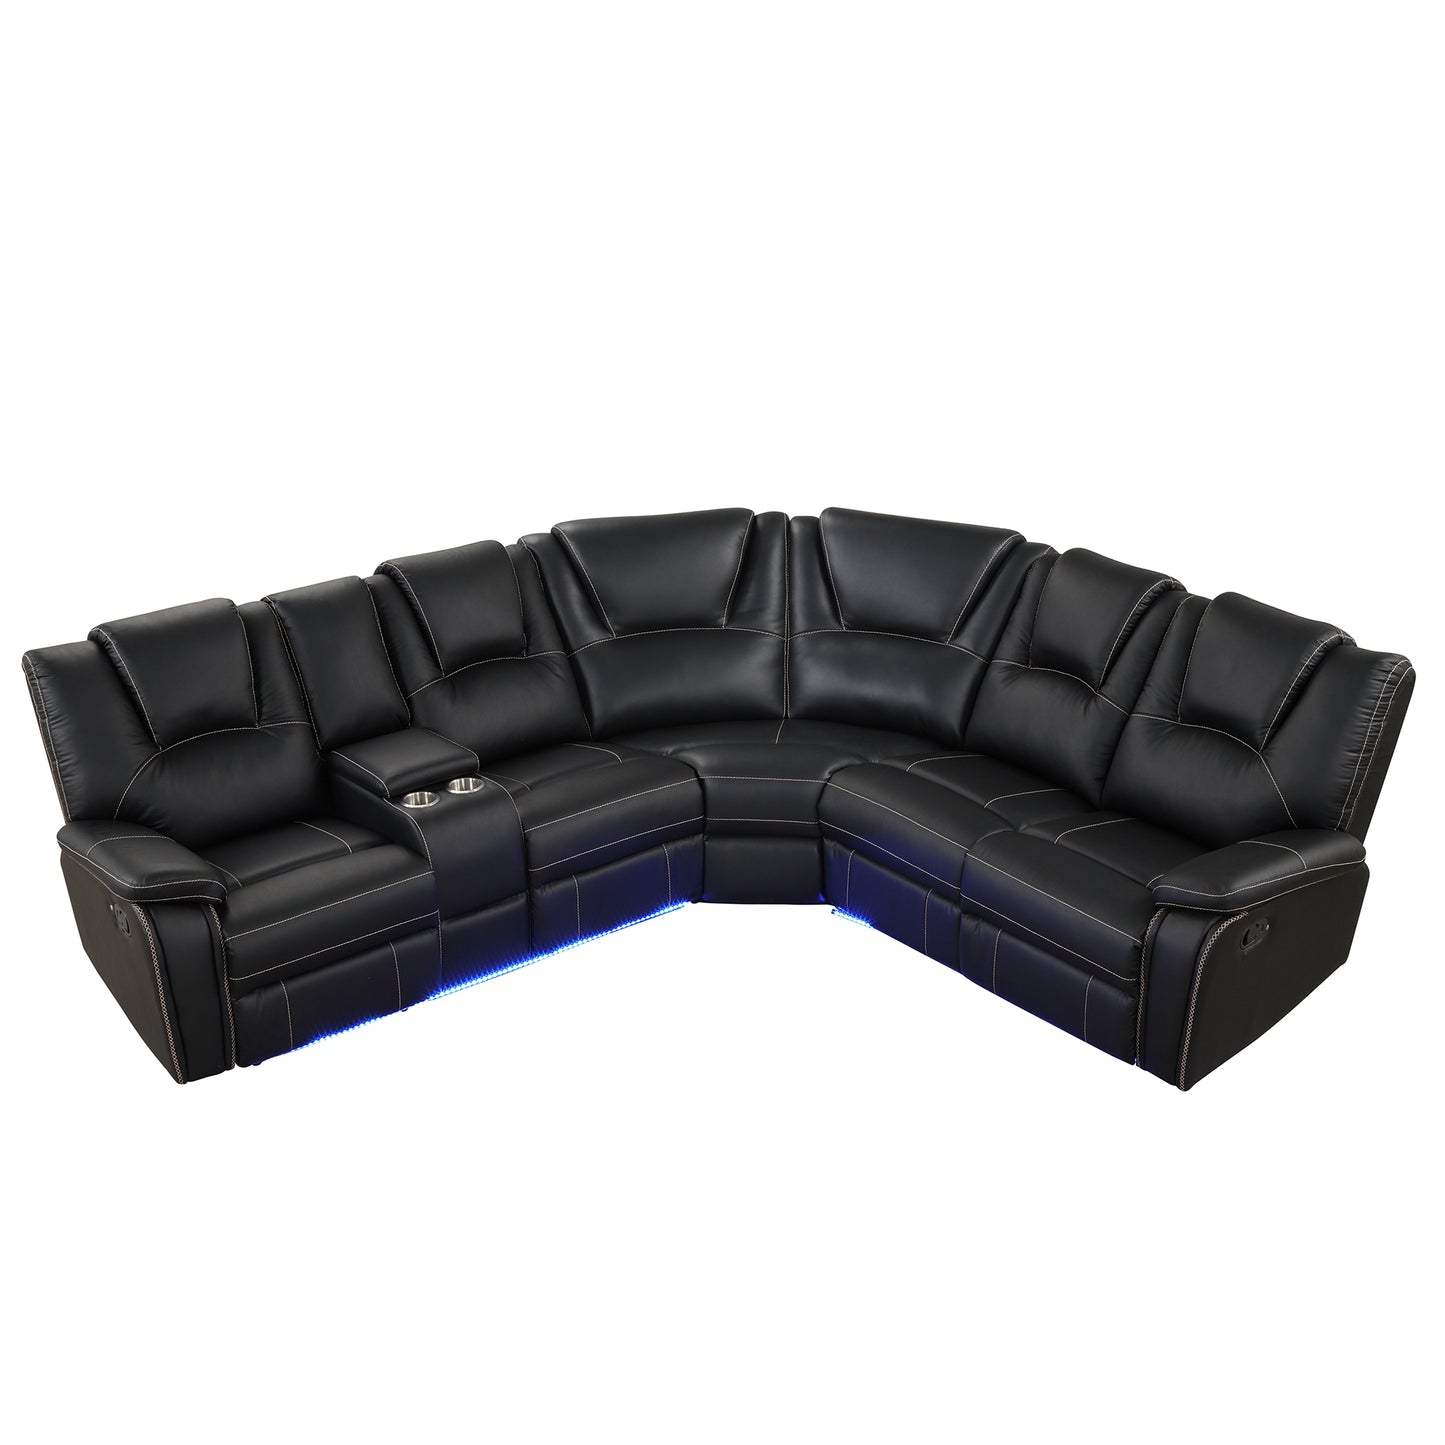 Leather Recliner, LED Console, Living Room Set